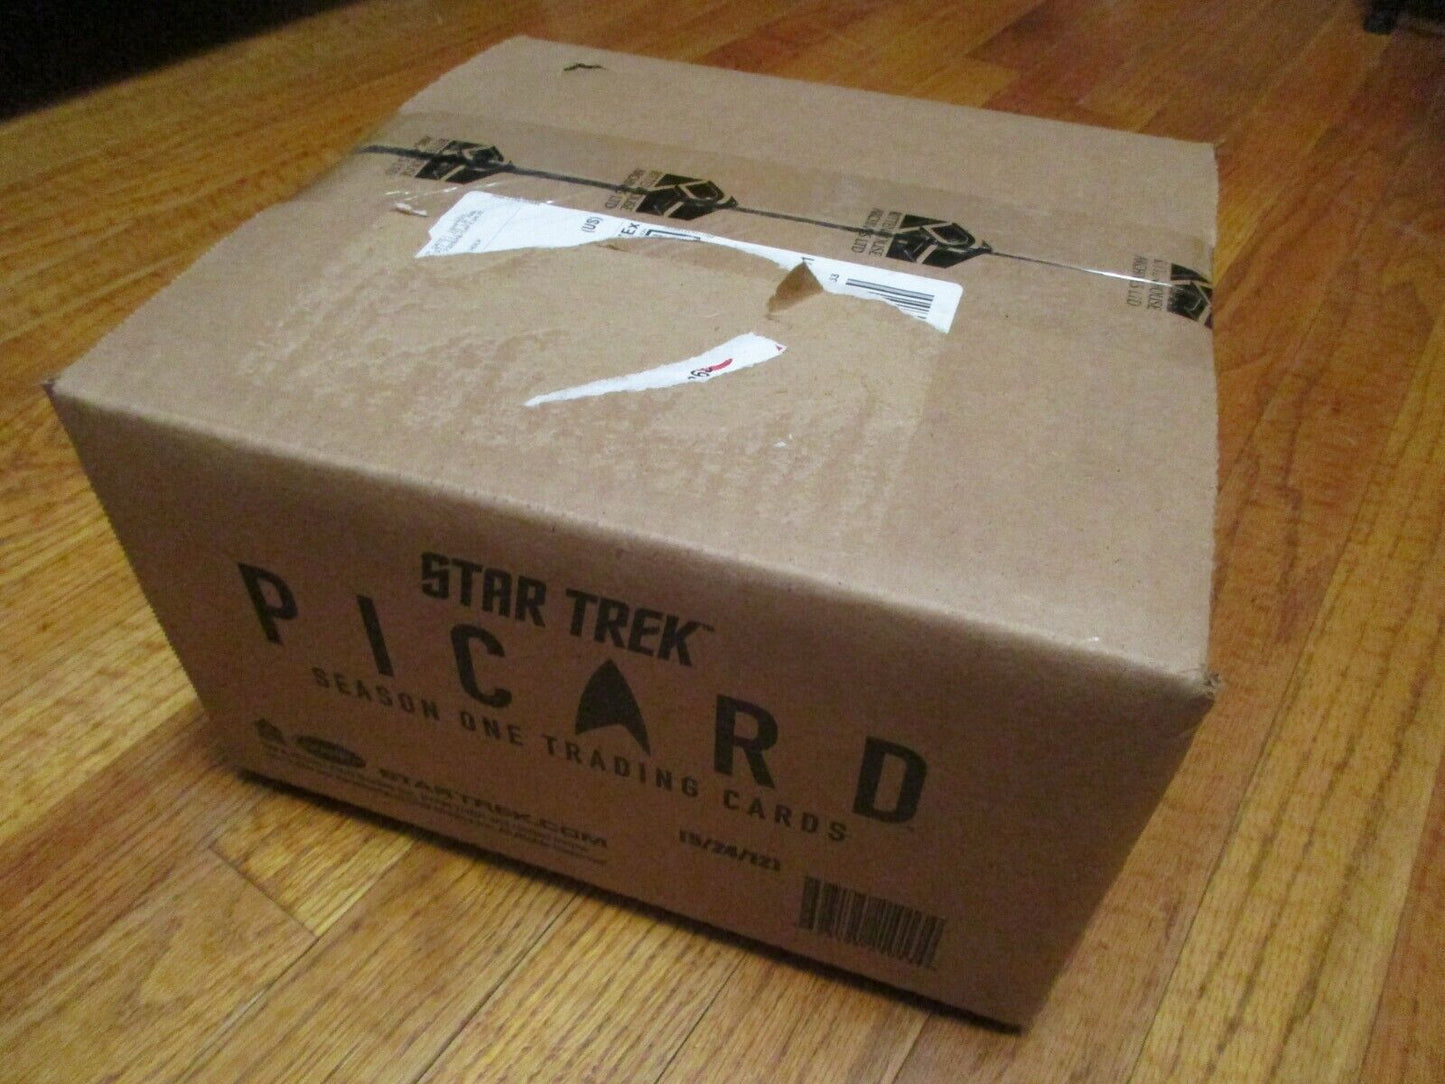 Star Trek Picard Season 1 Trading Cards Factory Sealed Case of 12 Boxes (2021 Rittenhouse Archives)